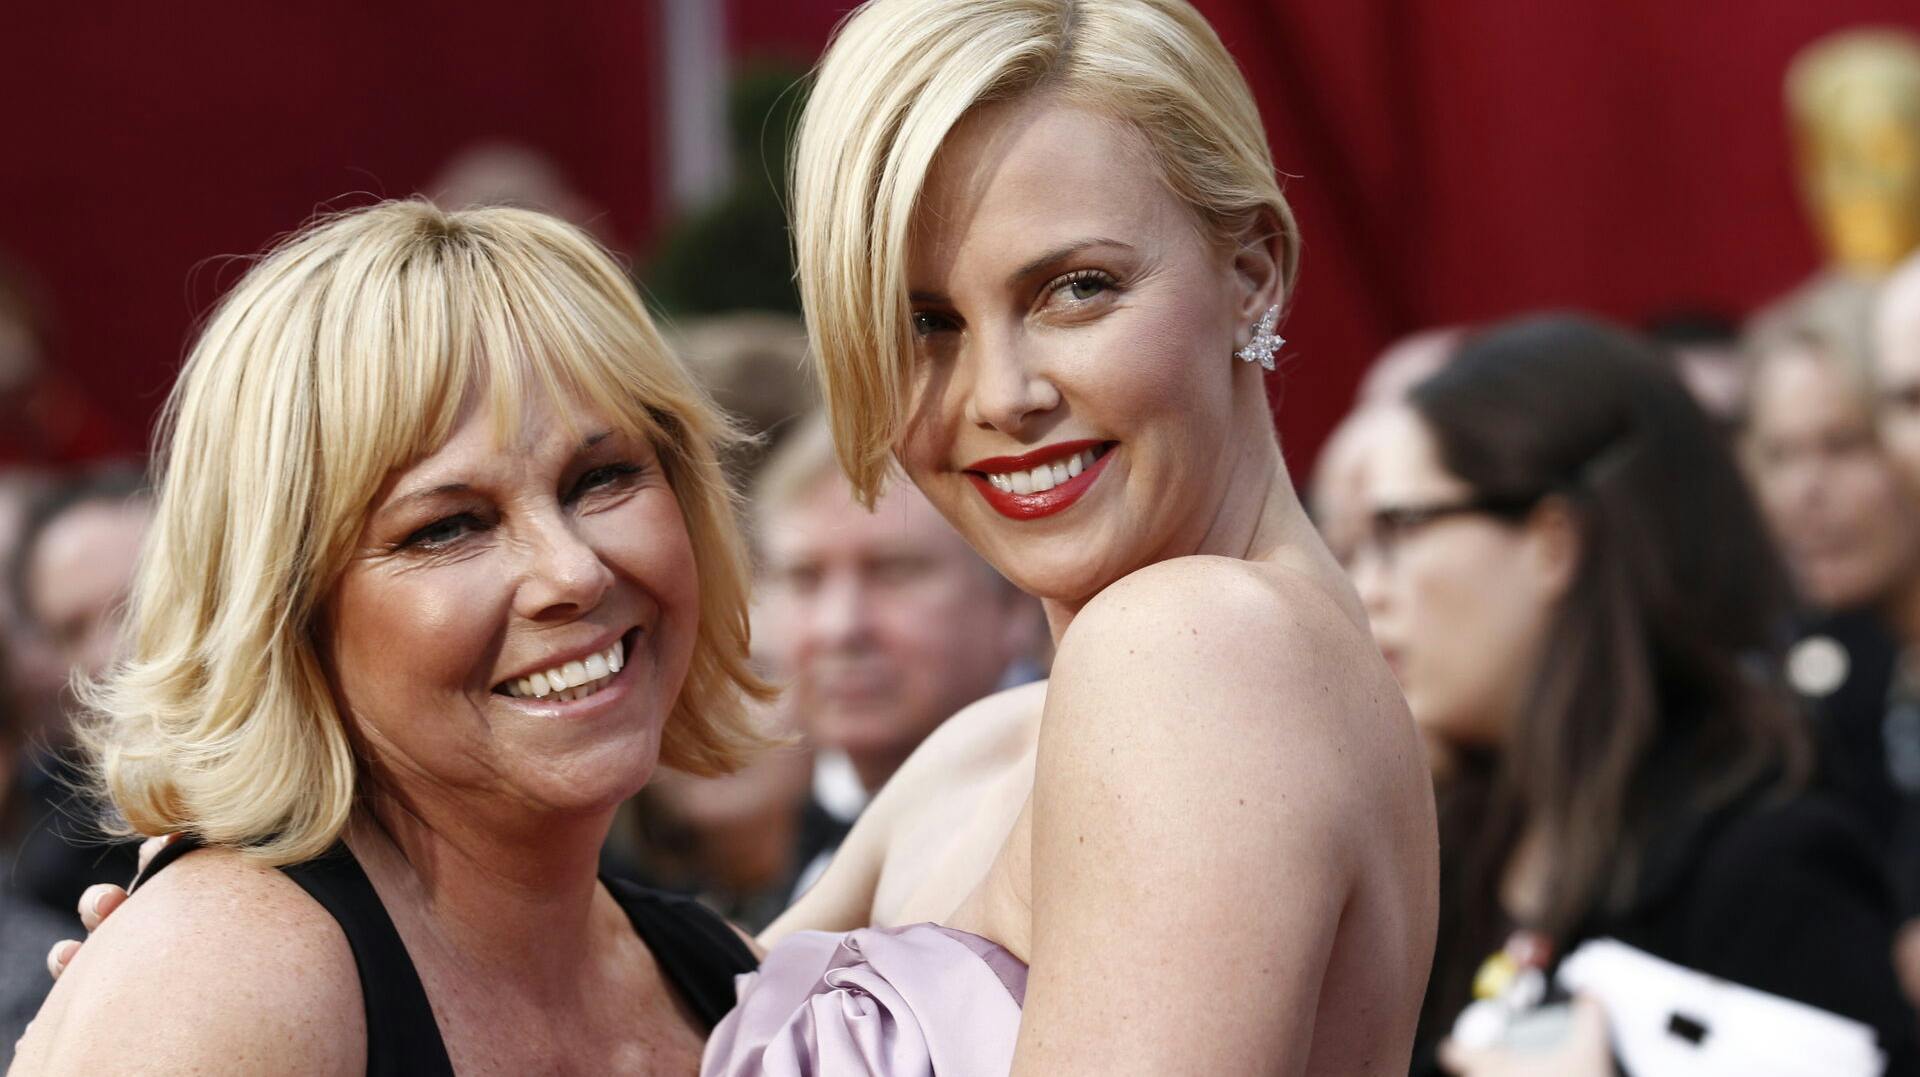 Charlize Theron and her mother Gerda arrive at the 82nd Academy Awards Sunday, March 7, 2010, in the Hollywood section of Los Angeles. (AP Photo/Matt Sayles)